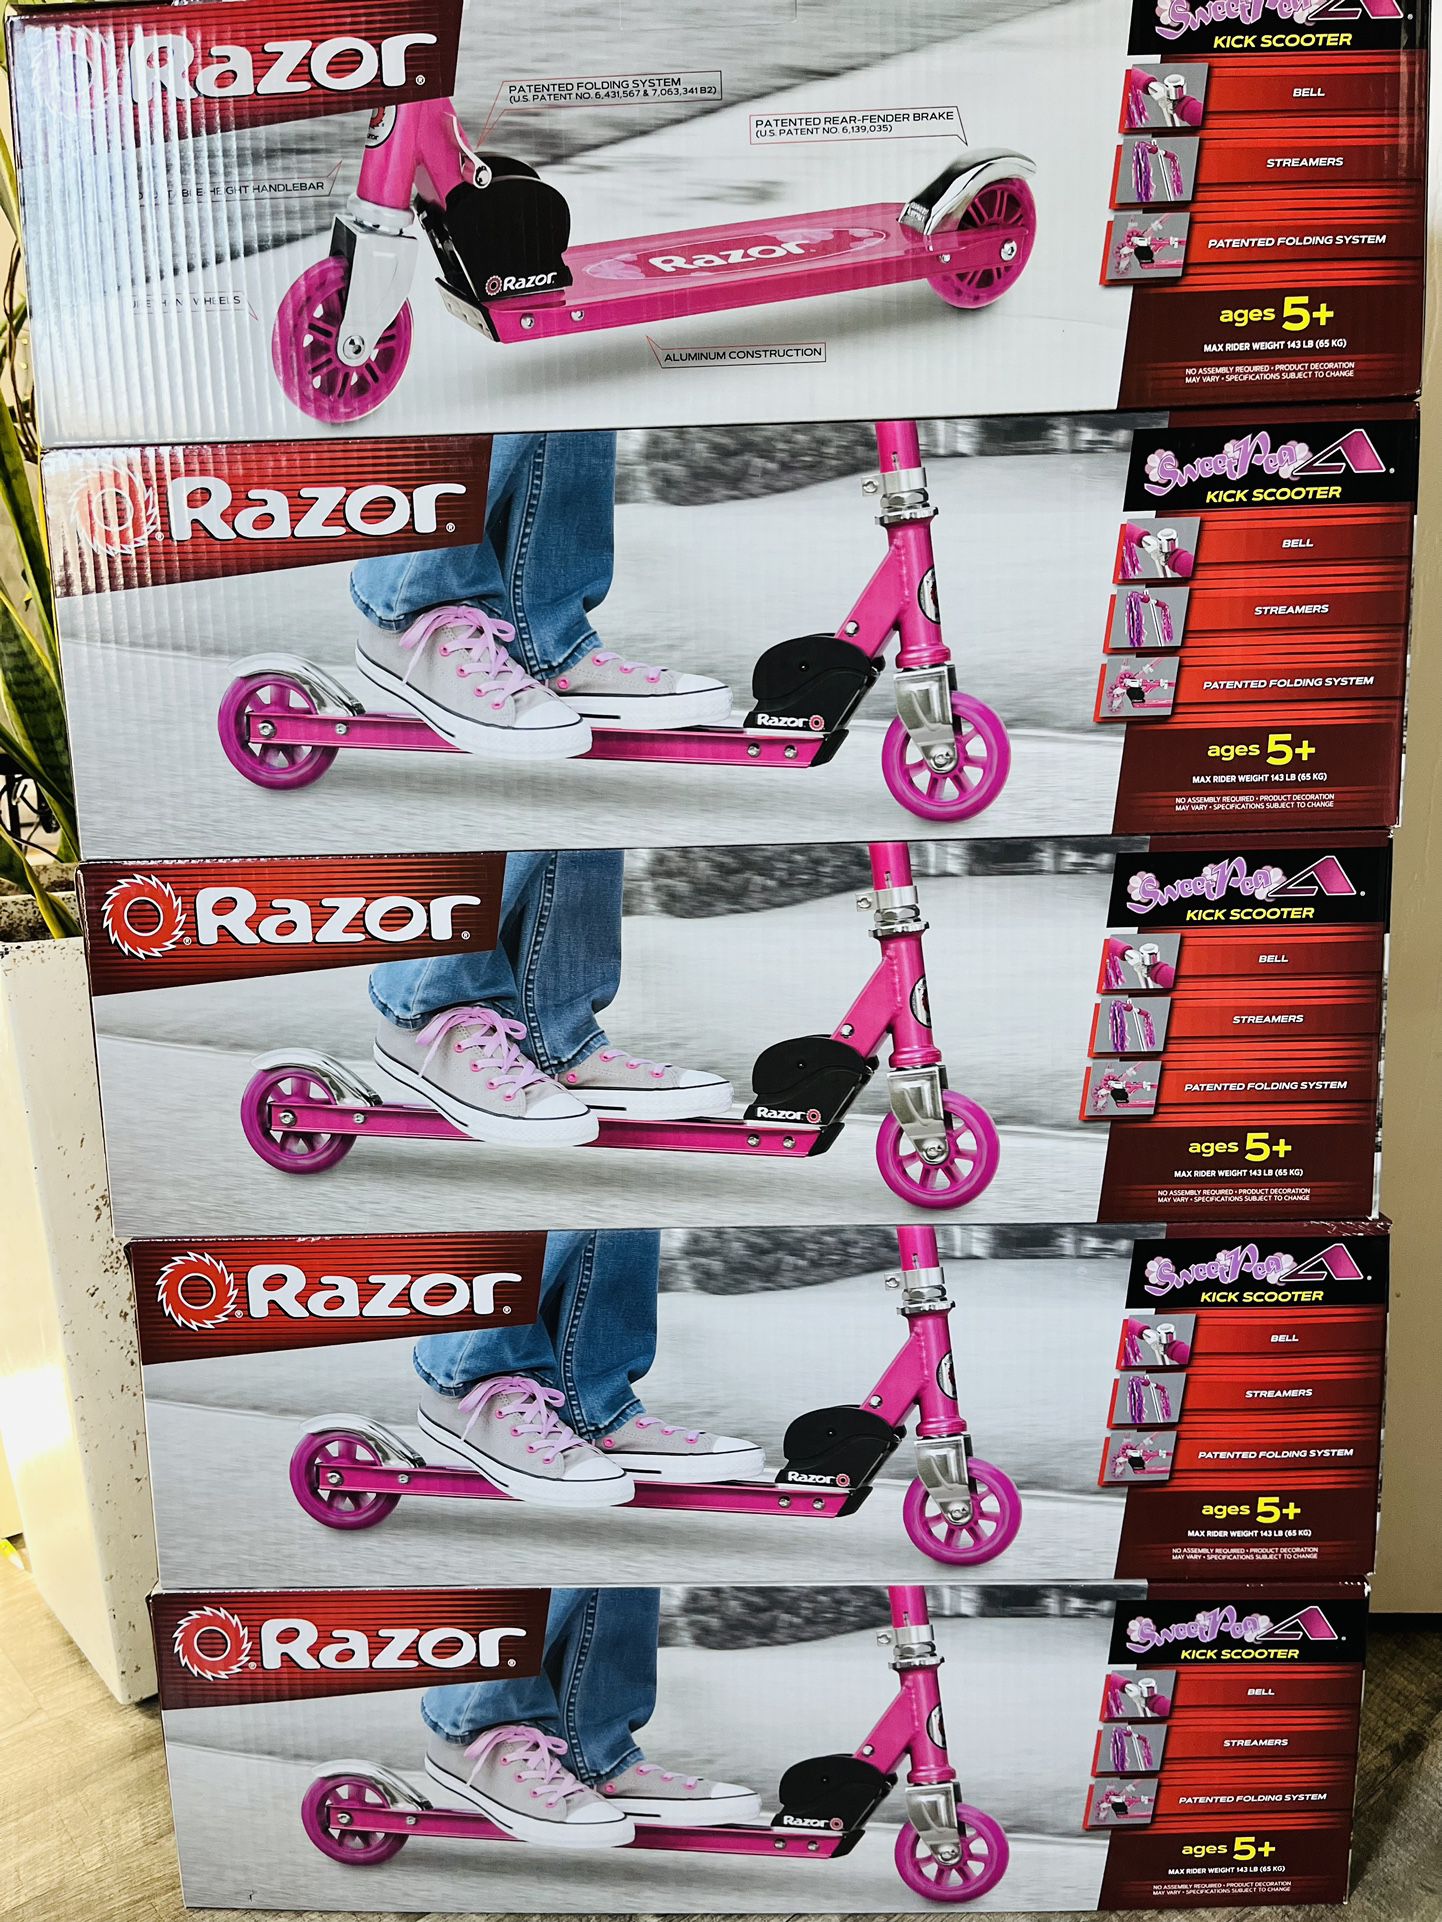 $30 Each Razor Brand Scooter Brand New And Pick Up Gahanna